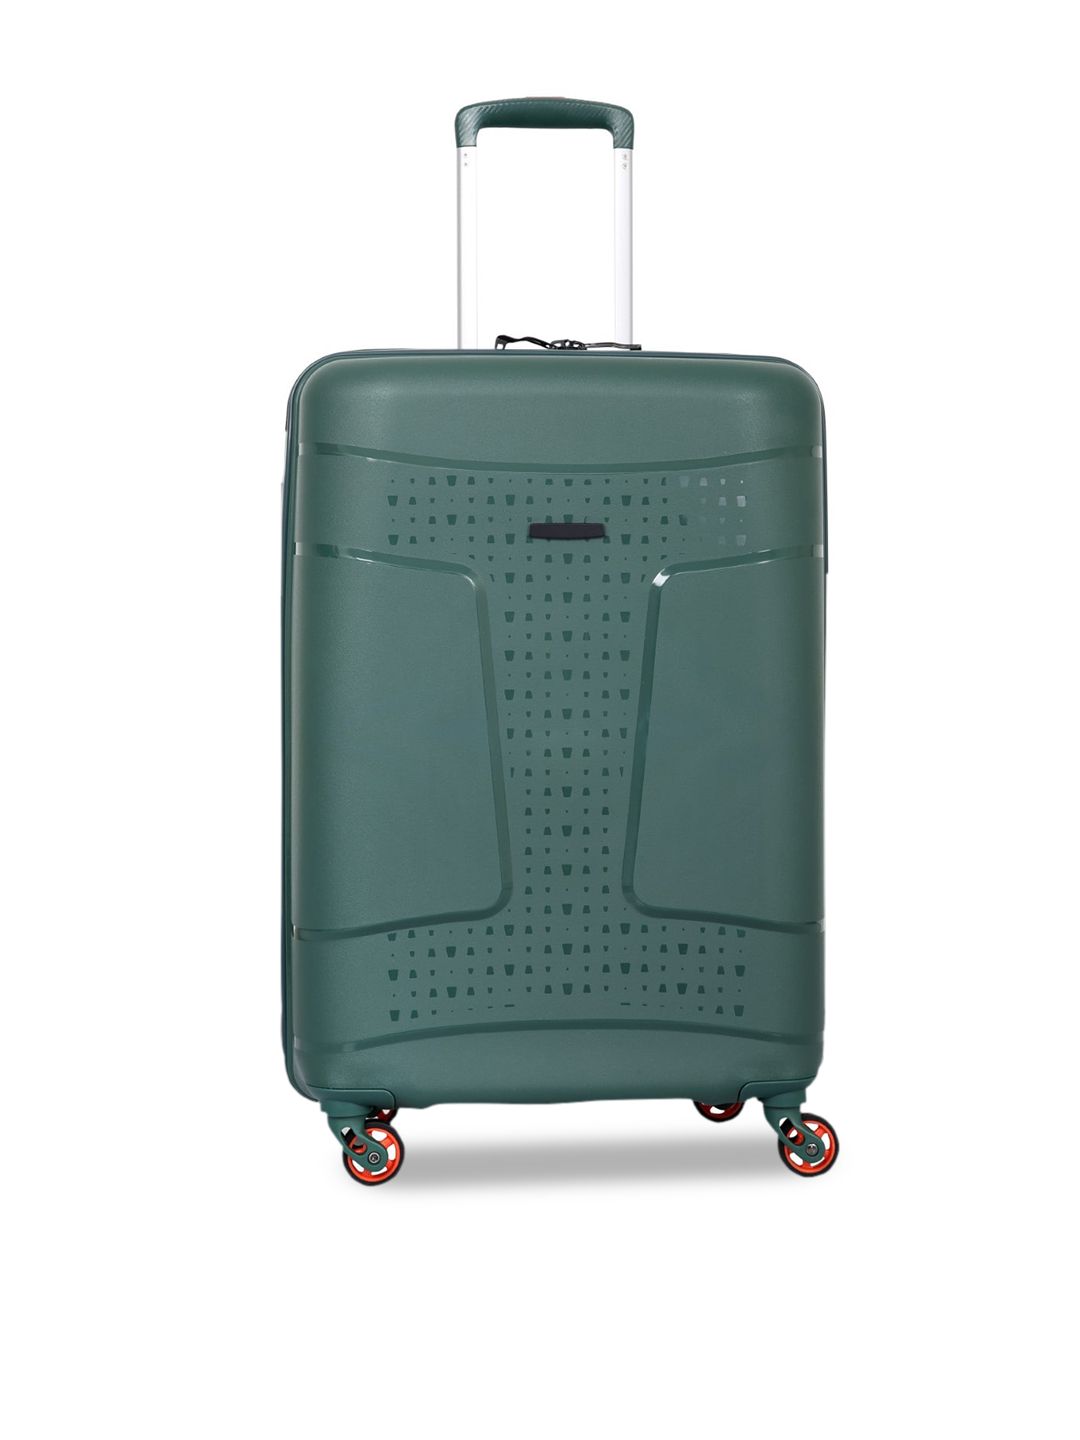 Polo Class Green 24 Inch Trolley Bag Price in India